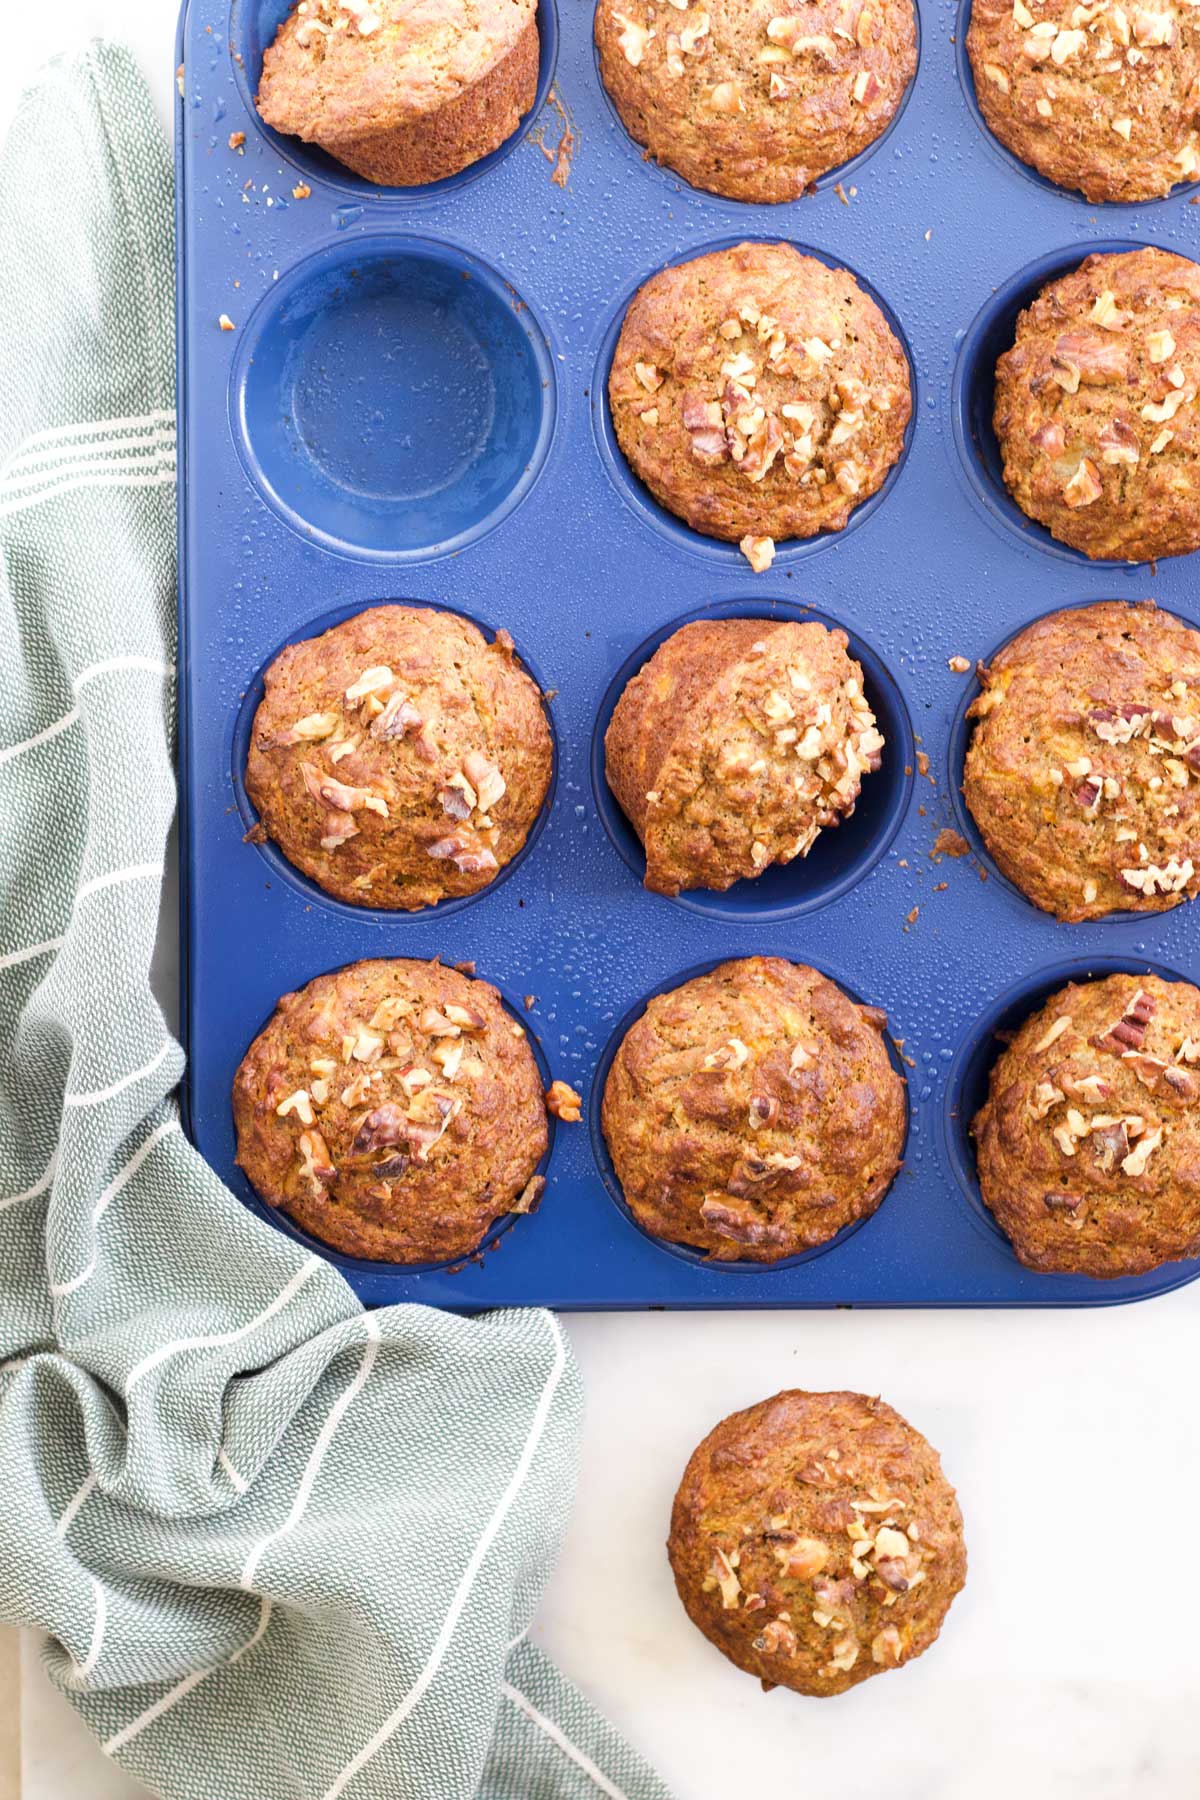 Carrot and Apple Muffins in Muffin Tray